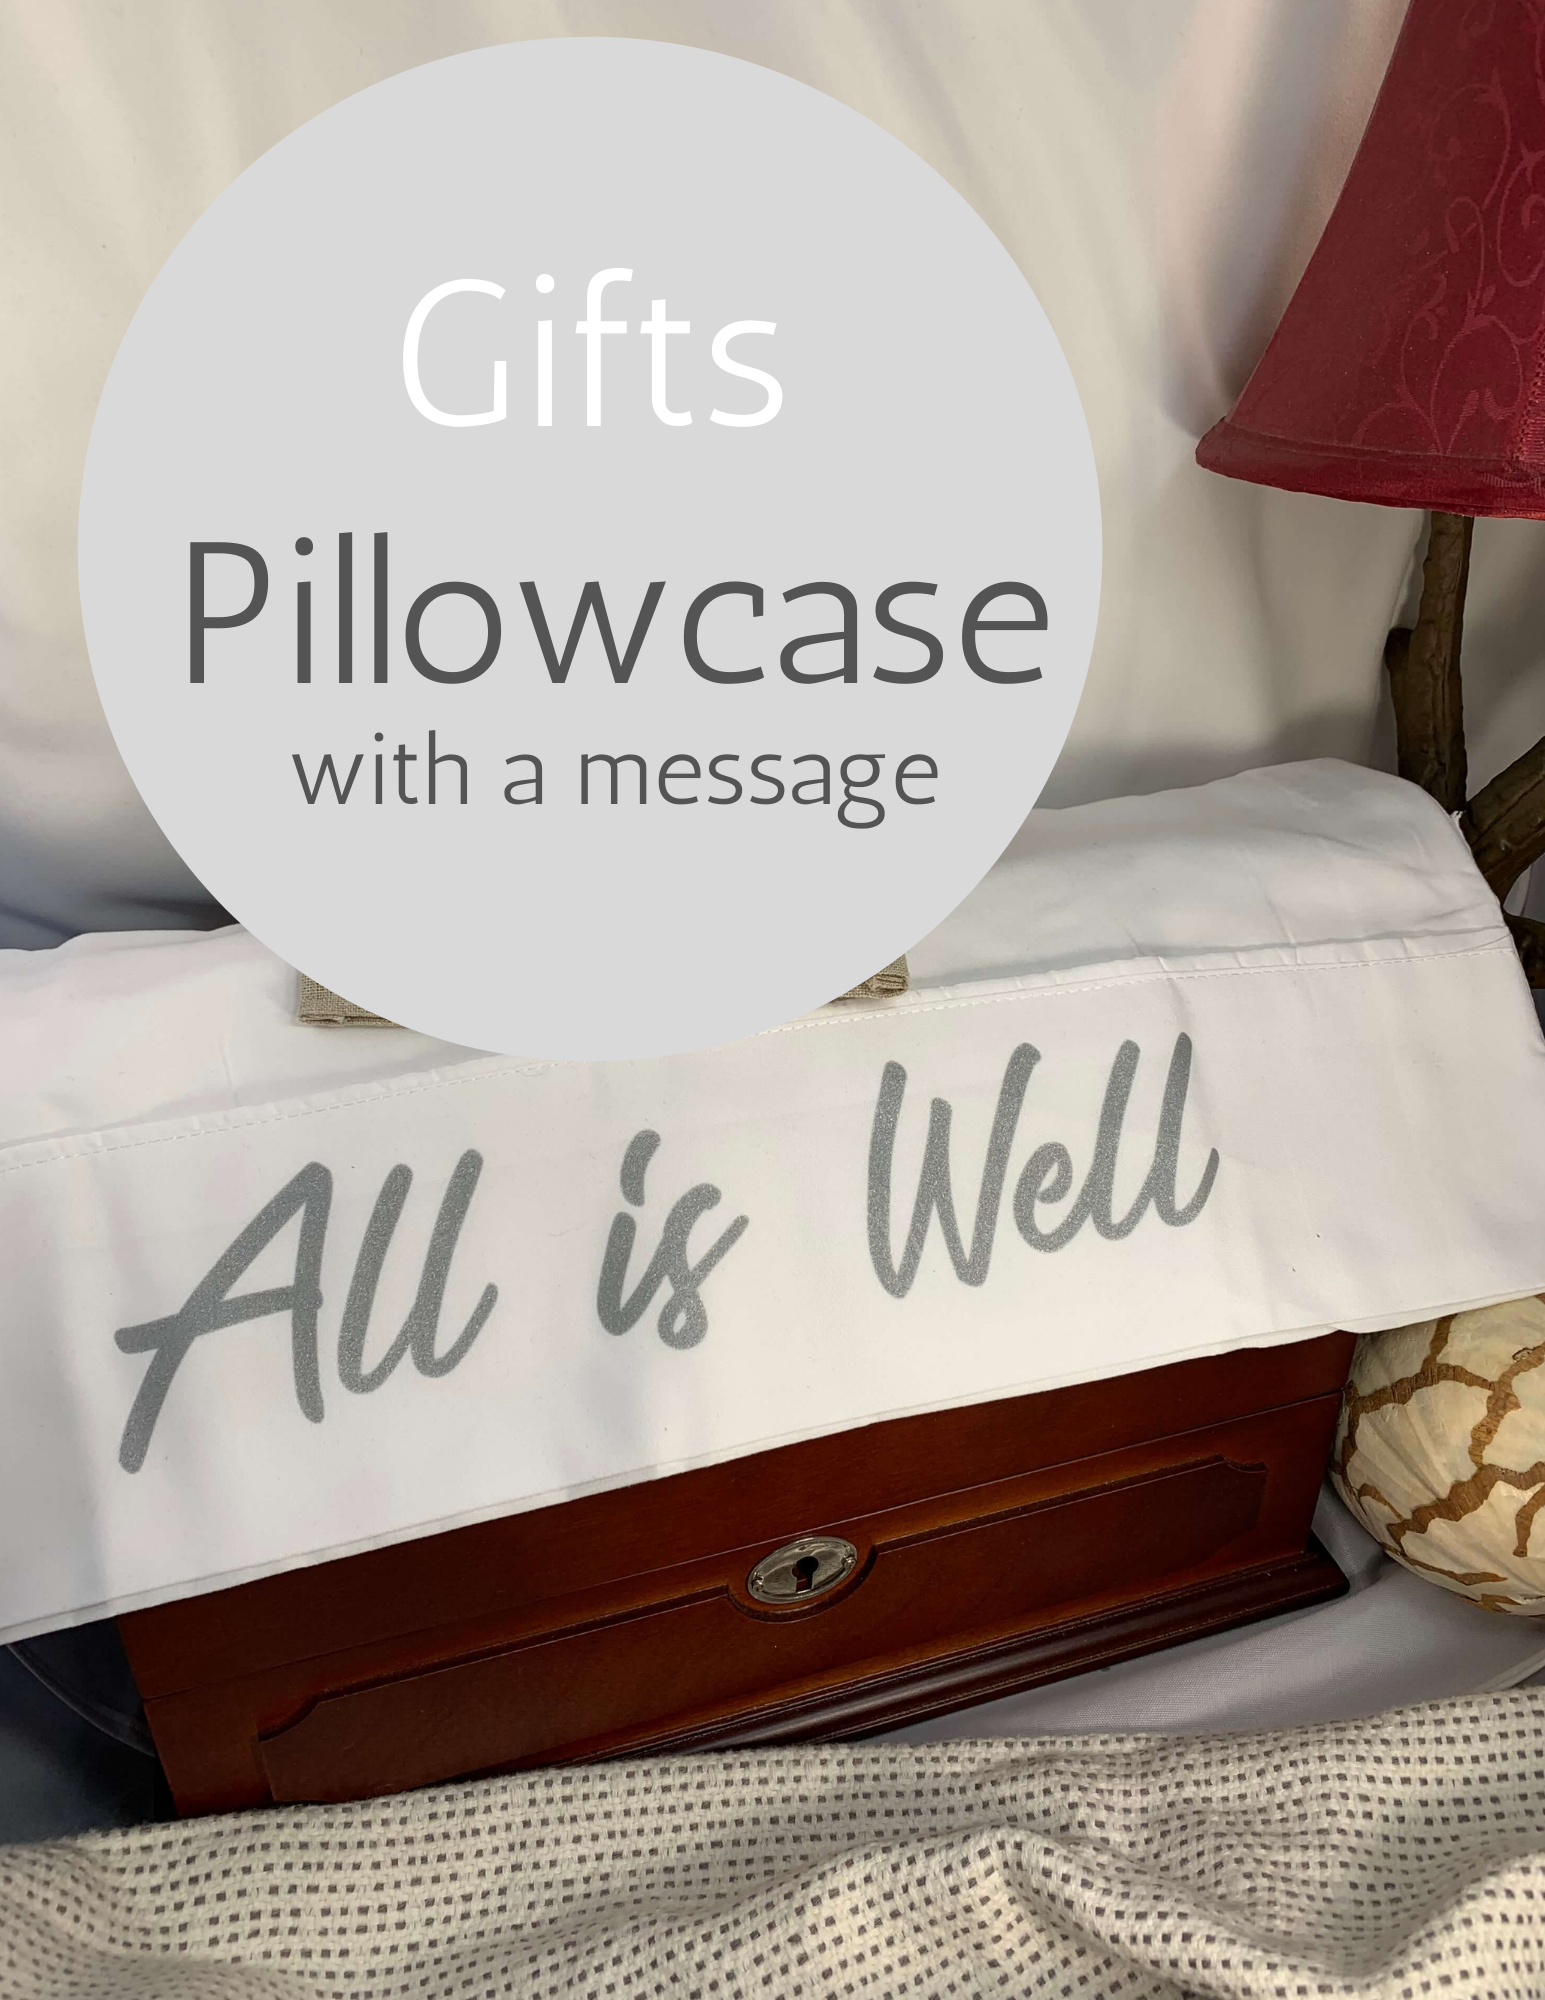 All is Well - Pillowcase with a Message